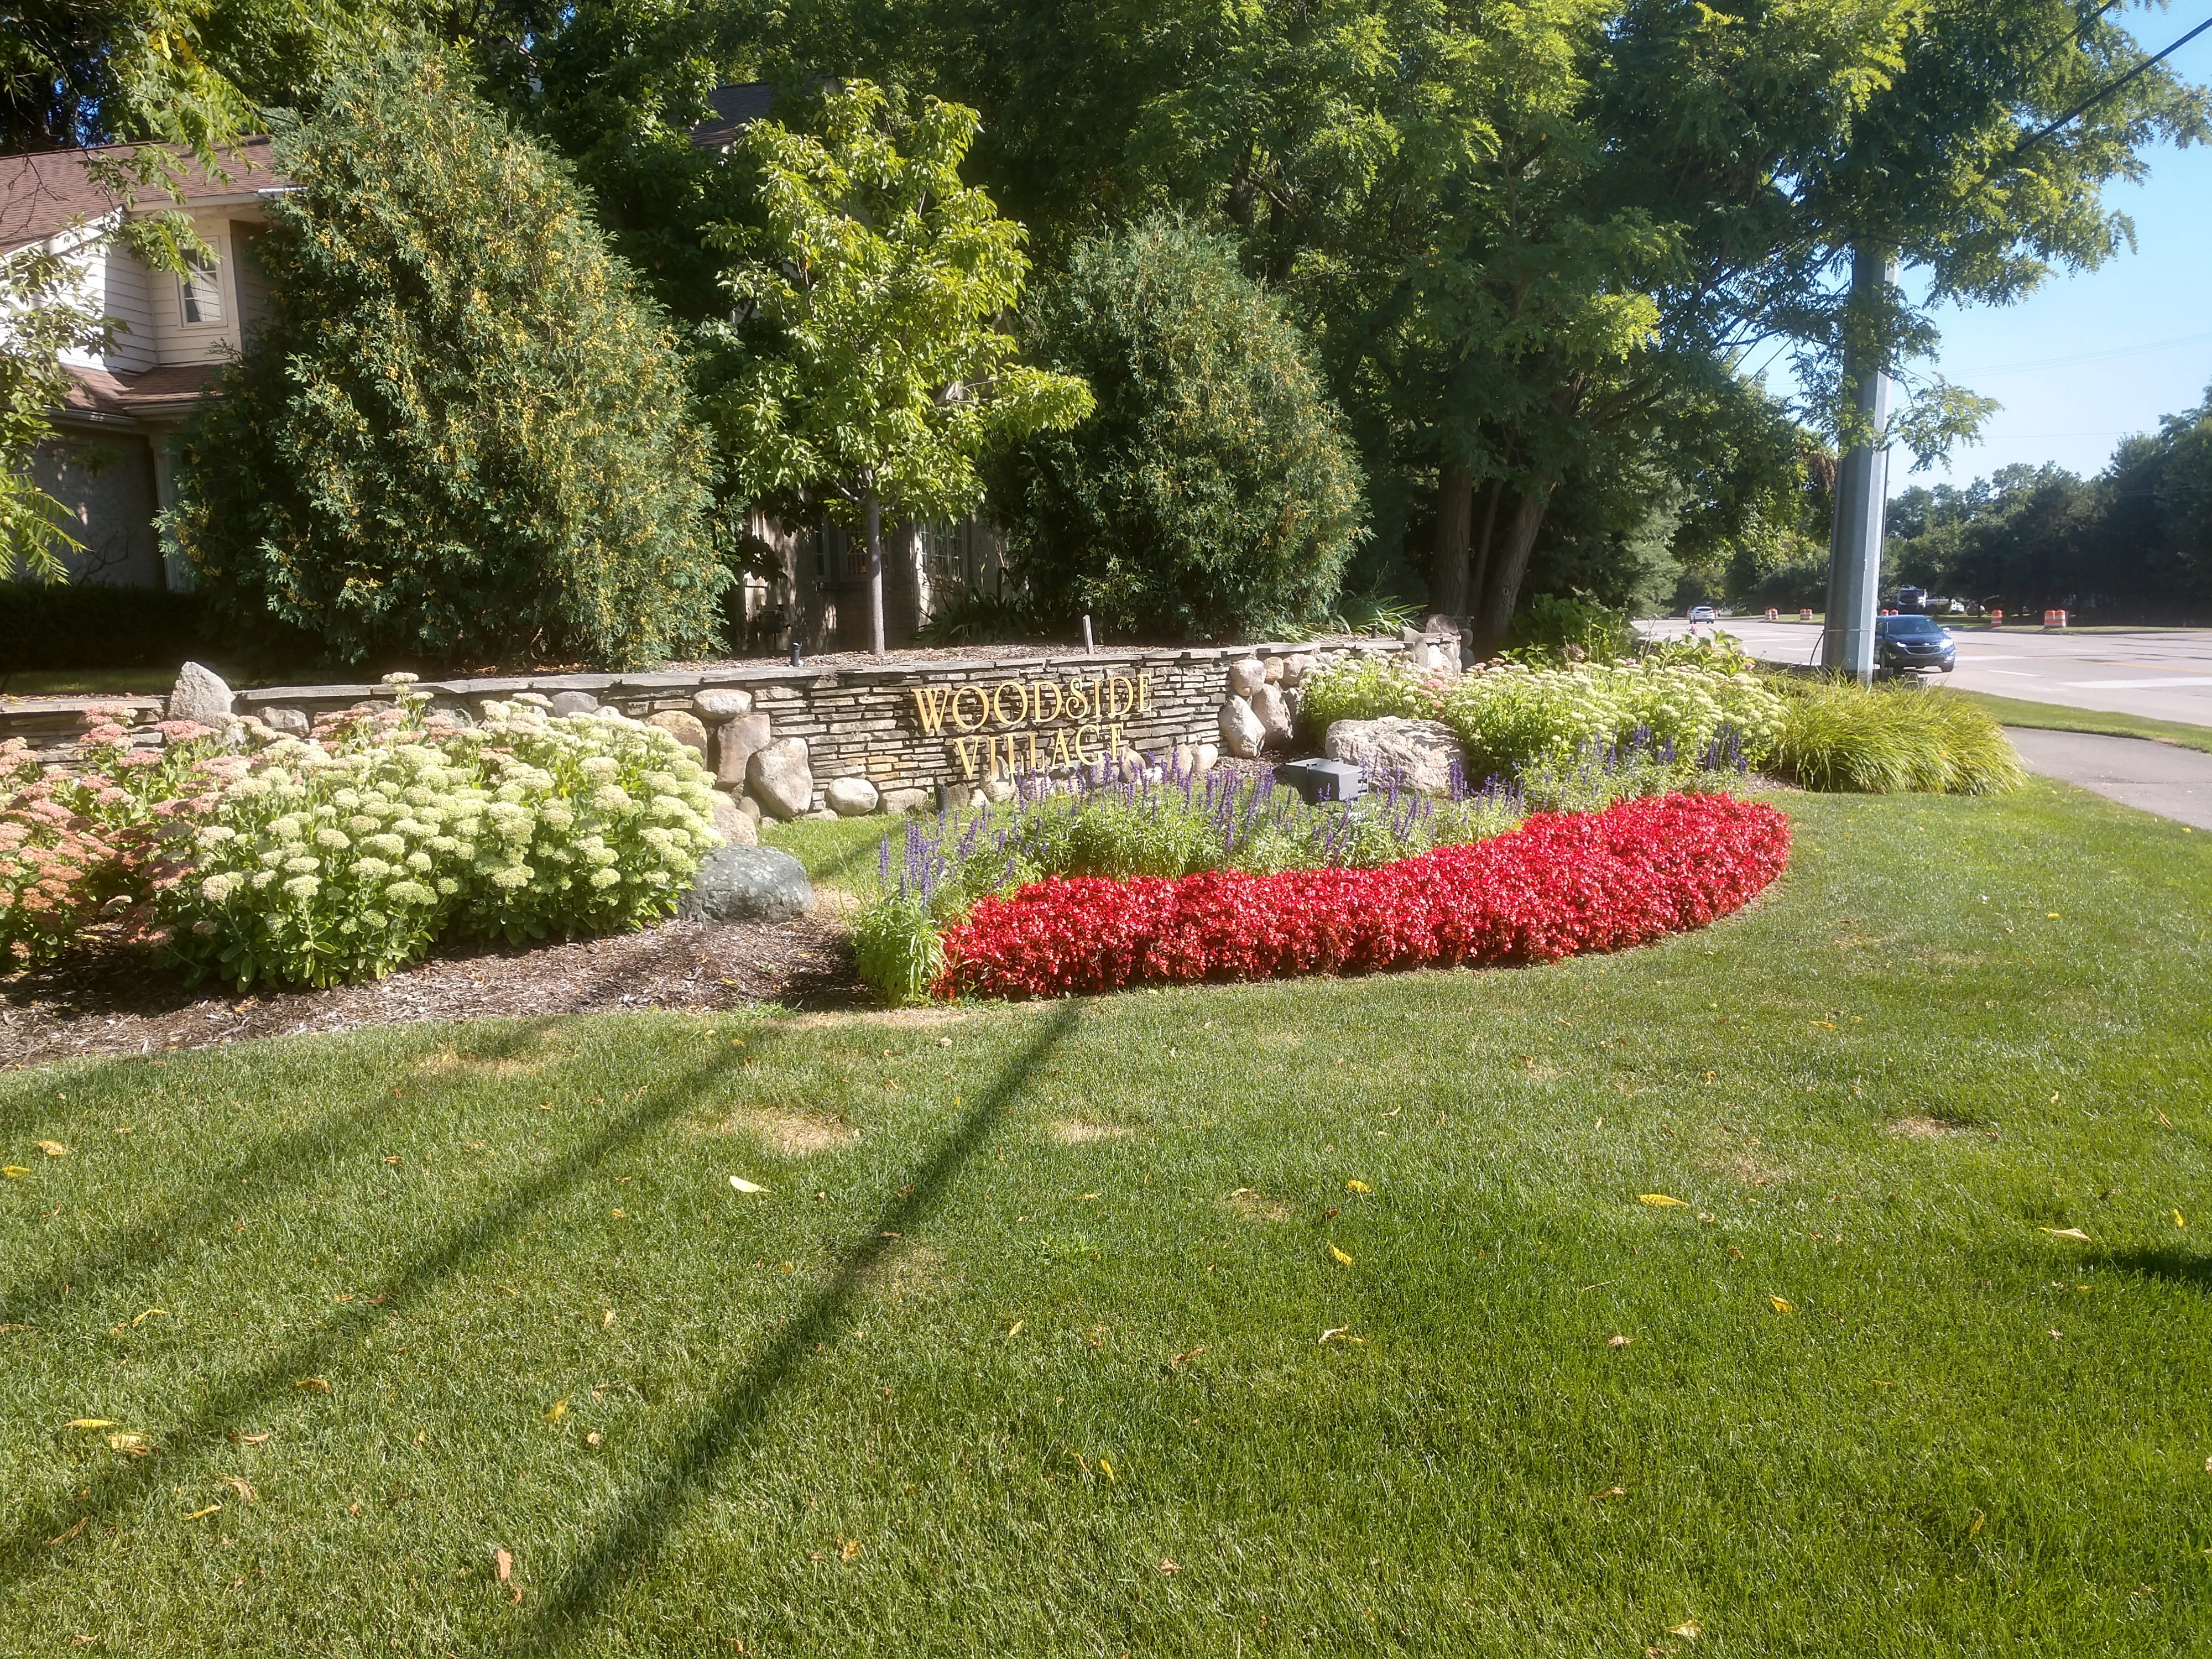 Woodside Village side with annual flowers